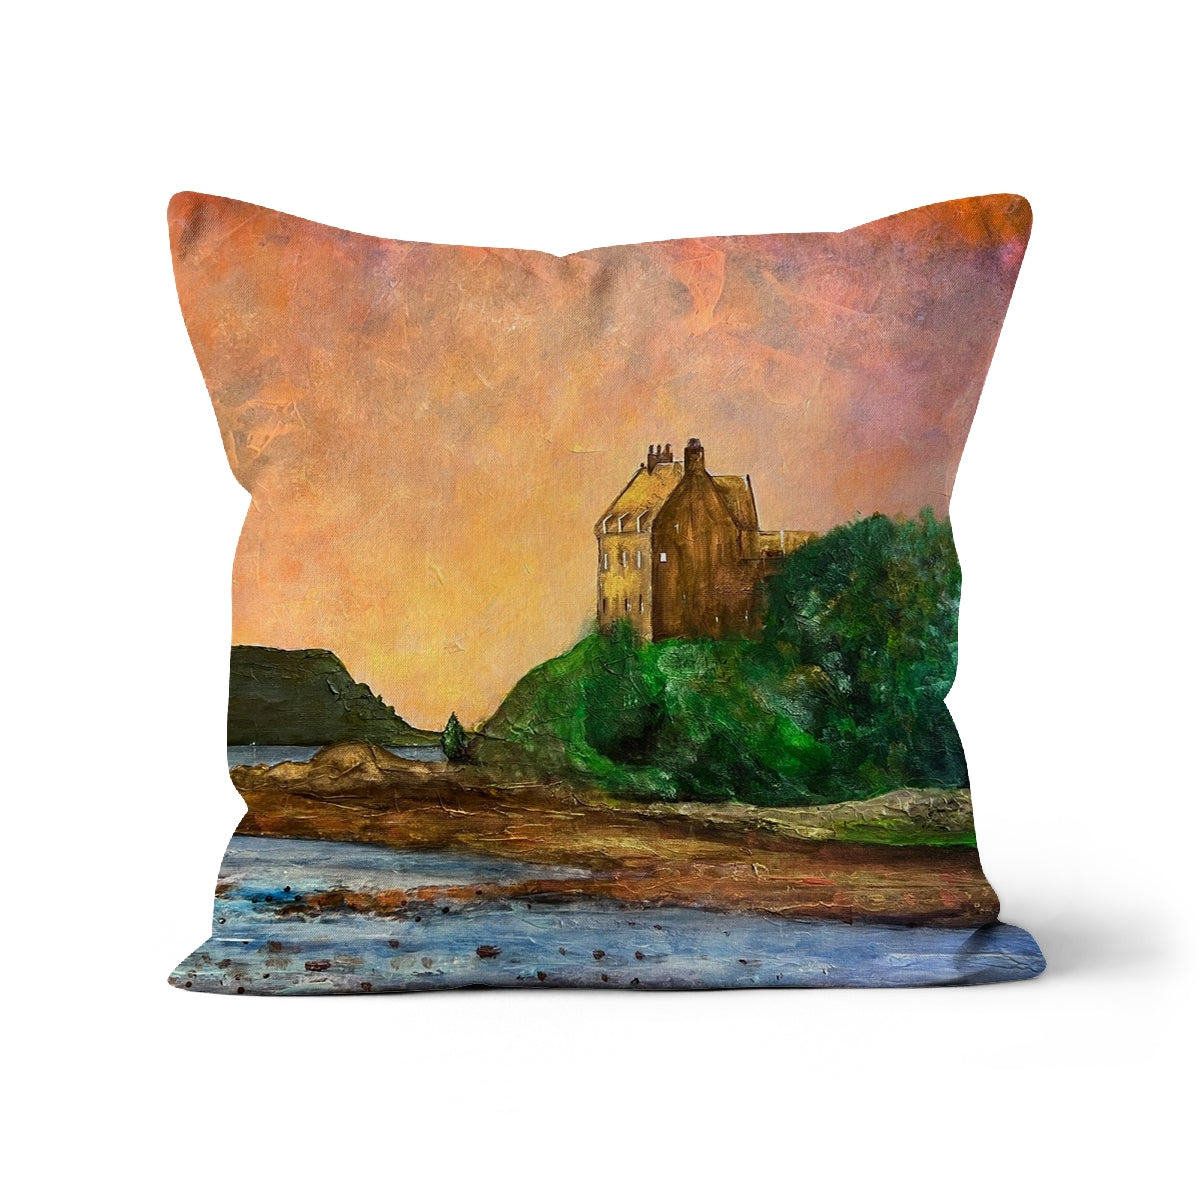 Duntrune Castle Art Gifts Cushion-Cushions-Historic & Iconic Scotland Art Gallery-Linen-16"x16"-Paintings, Prints, Homeware, Art Gifts From Scotland By Scottish Artist Kevin Hunter